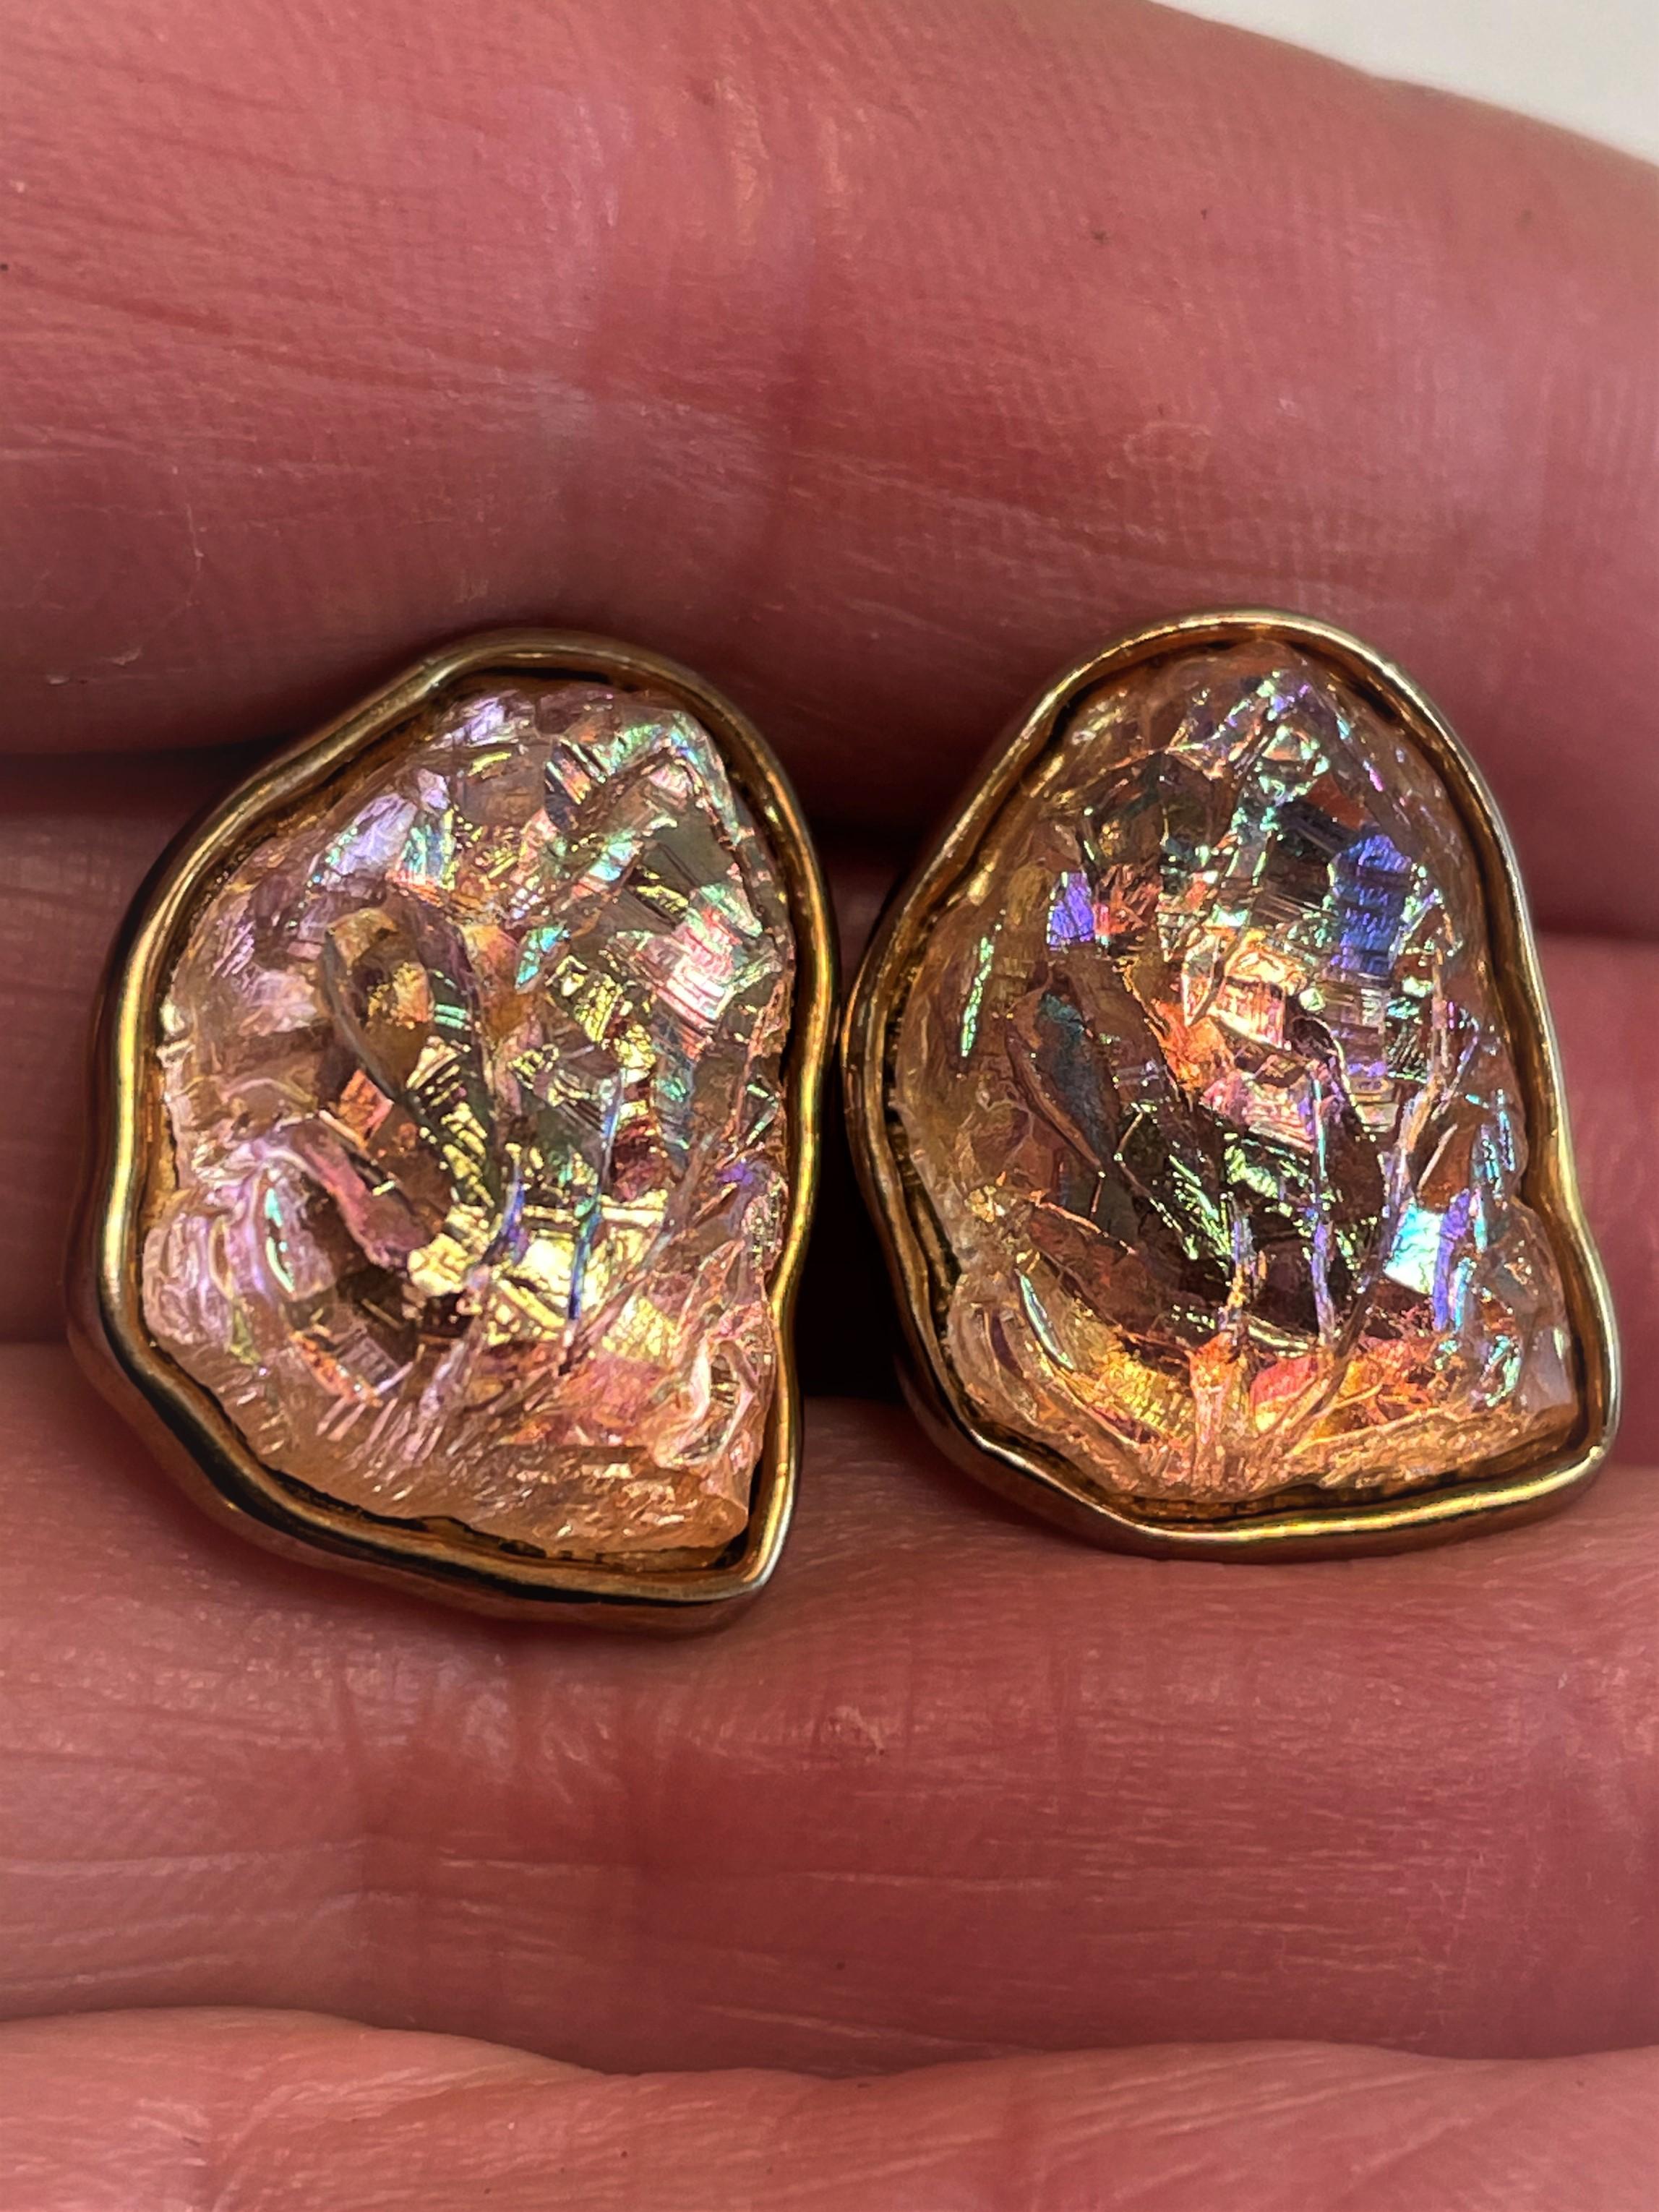 These are such stylish modernist clip on earrings made by Ben-Amun and clearly marked on the back. The vibrant, iridescent pinkish orange glass with an aurora borealis AB (rainbow) finish, has a free form shape and the molded glass surface is